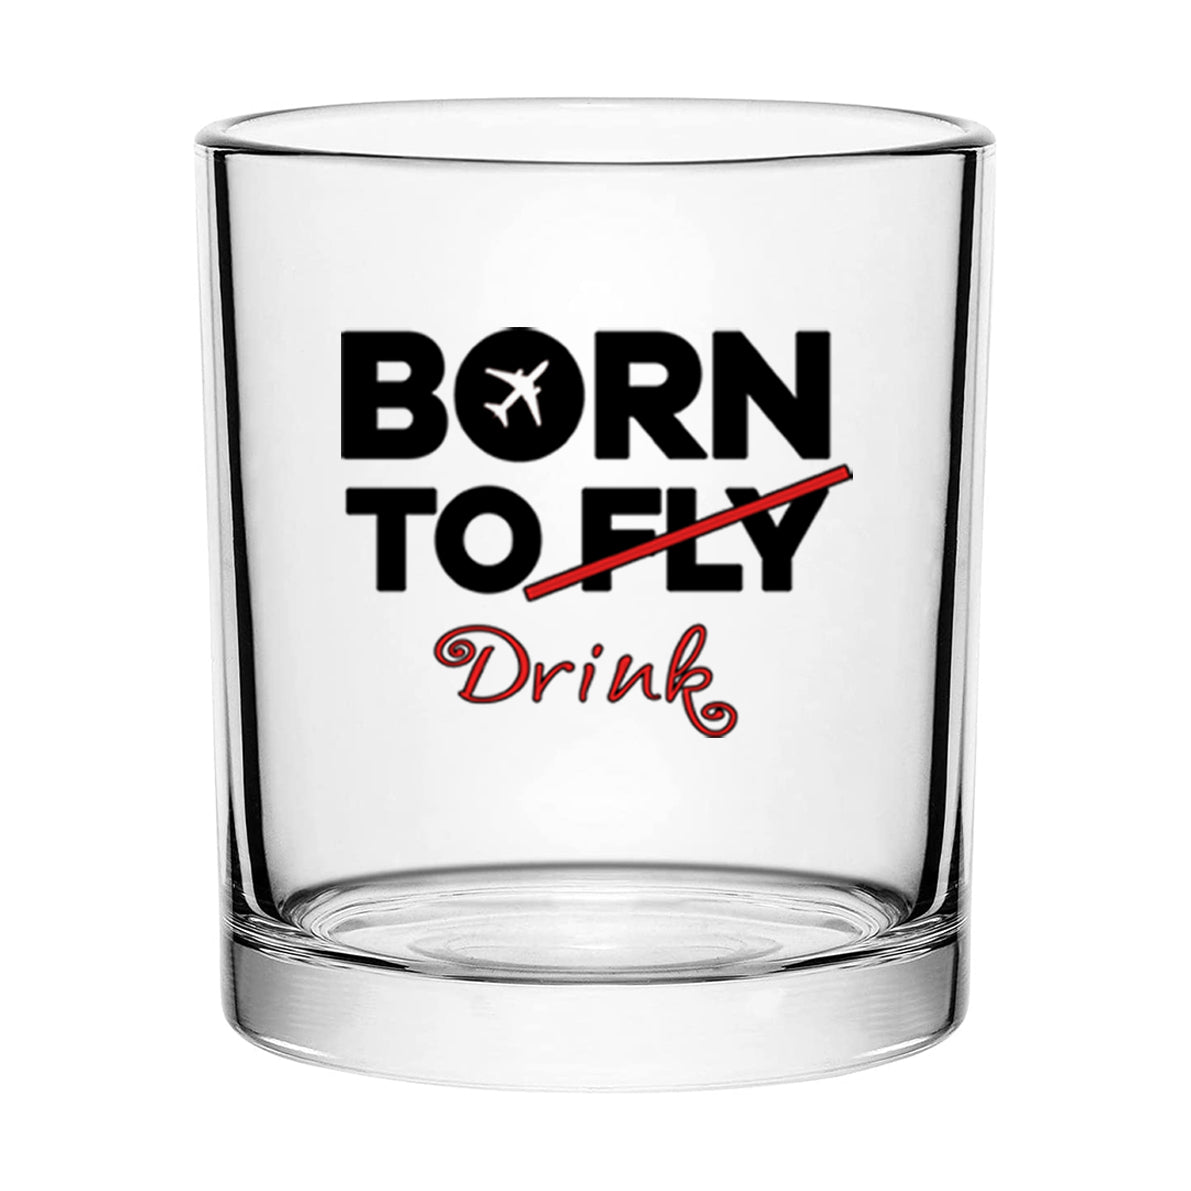 Born To Drink Designed Special Whiskey Glasses